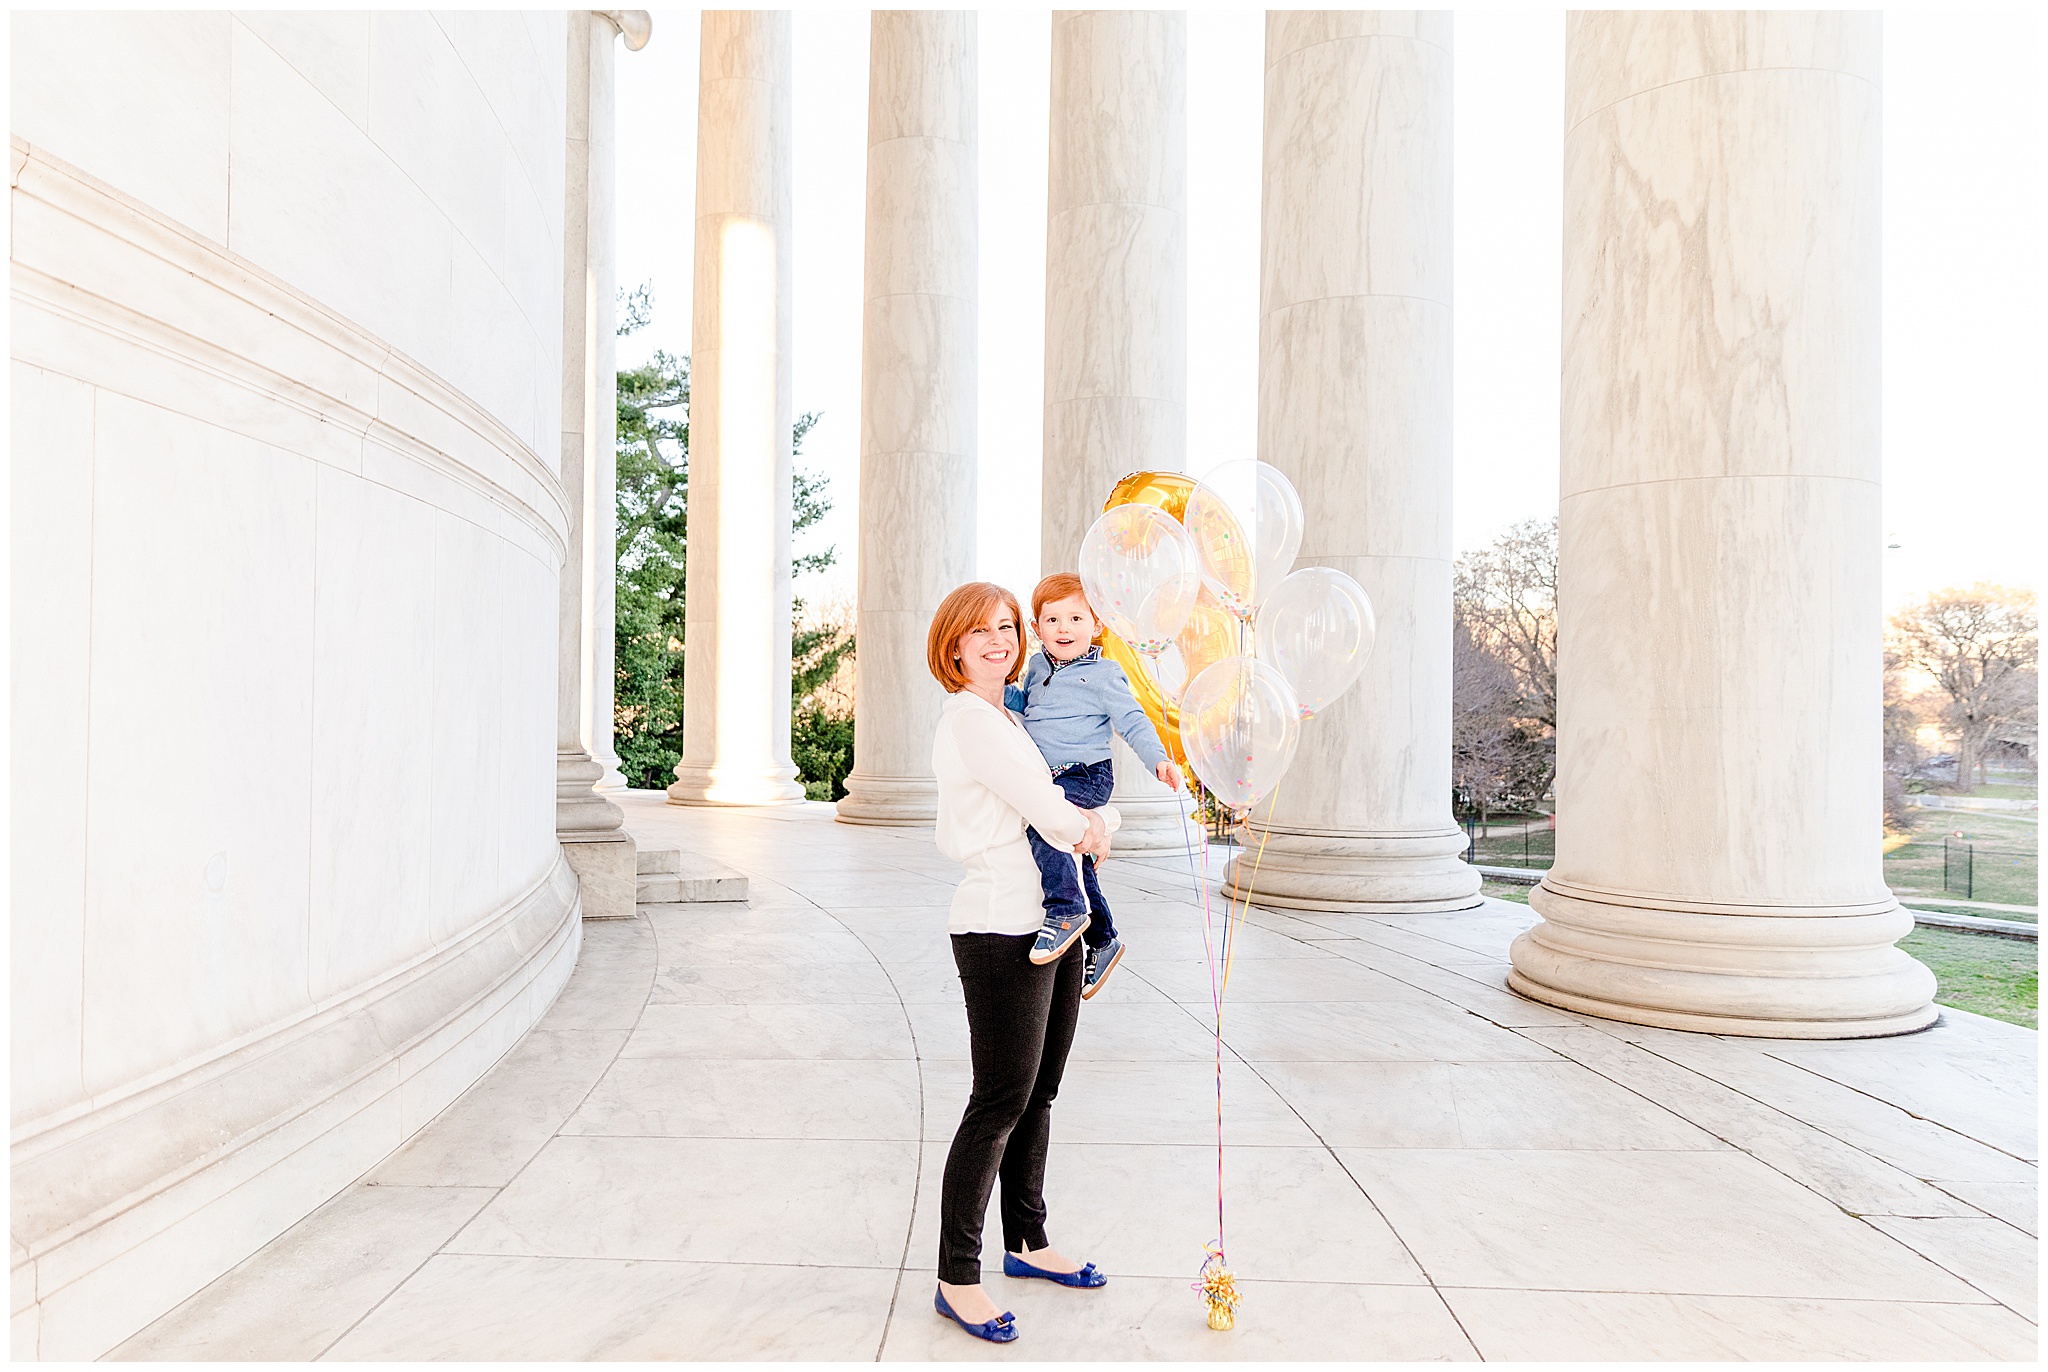 Birthday Photos at the Monuments in Washington D.C. by Kofmehl Photography